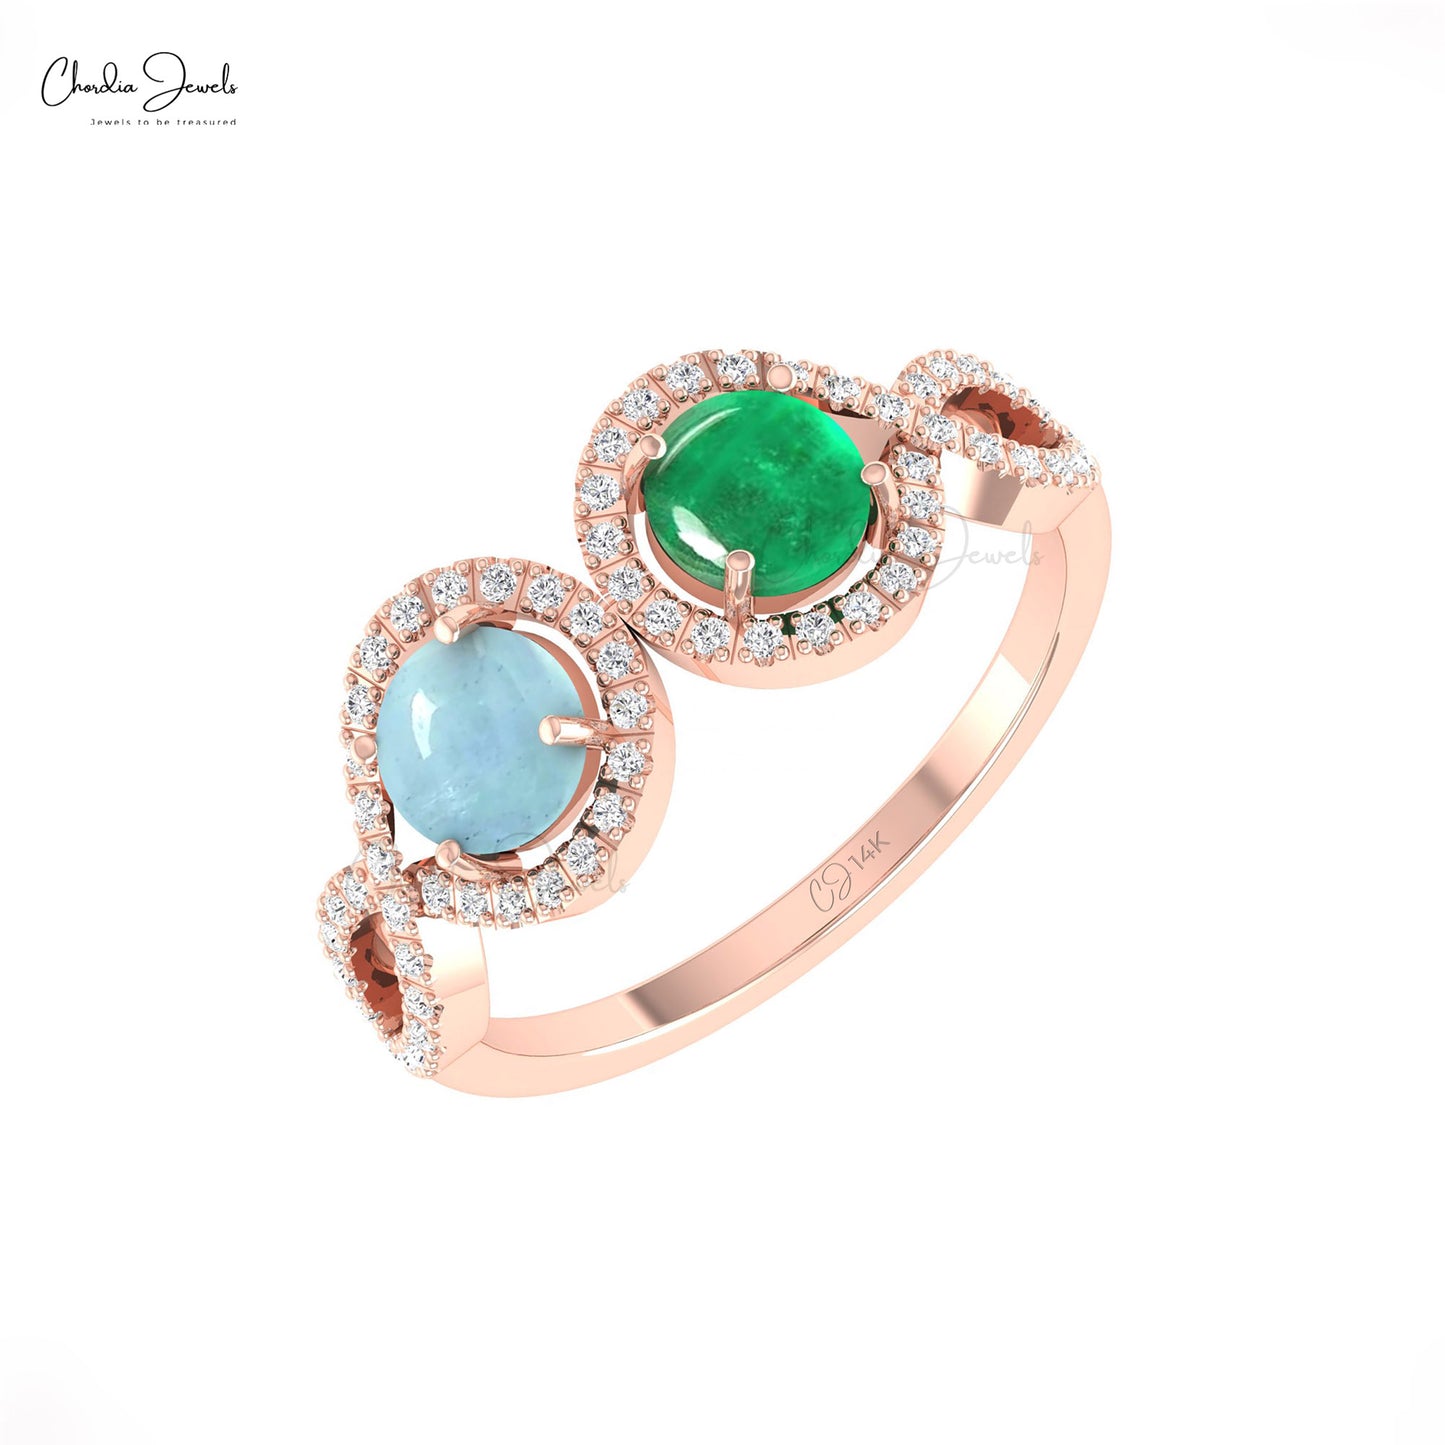 Find perfect finishing touch with this emerald and aquamarine ring.